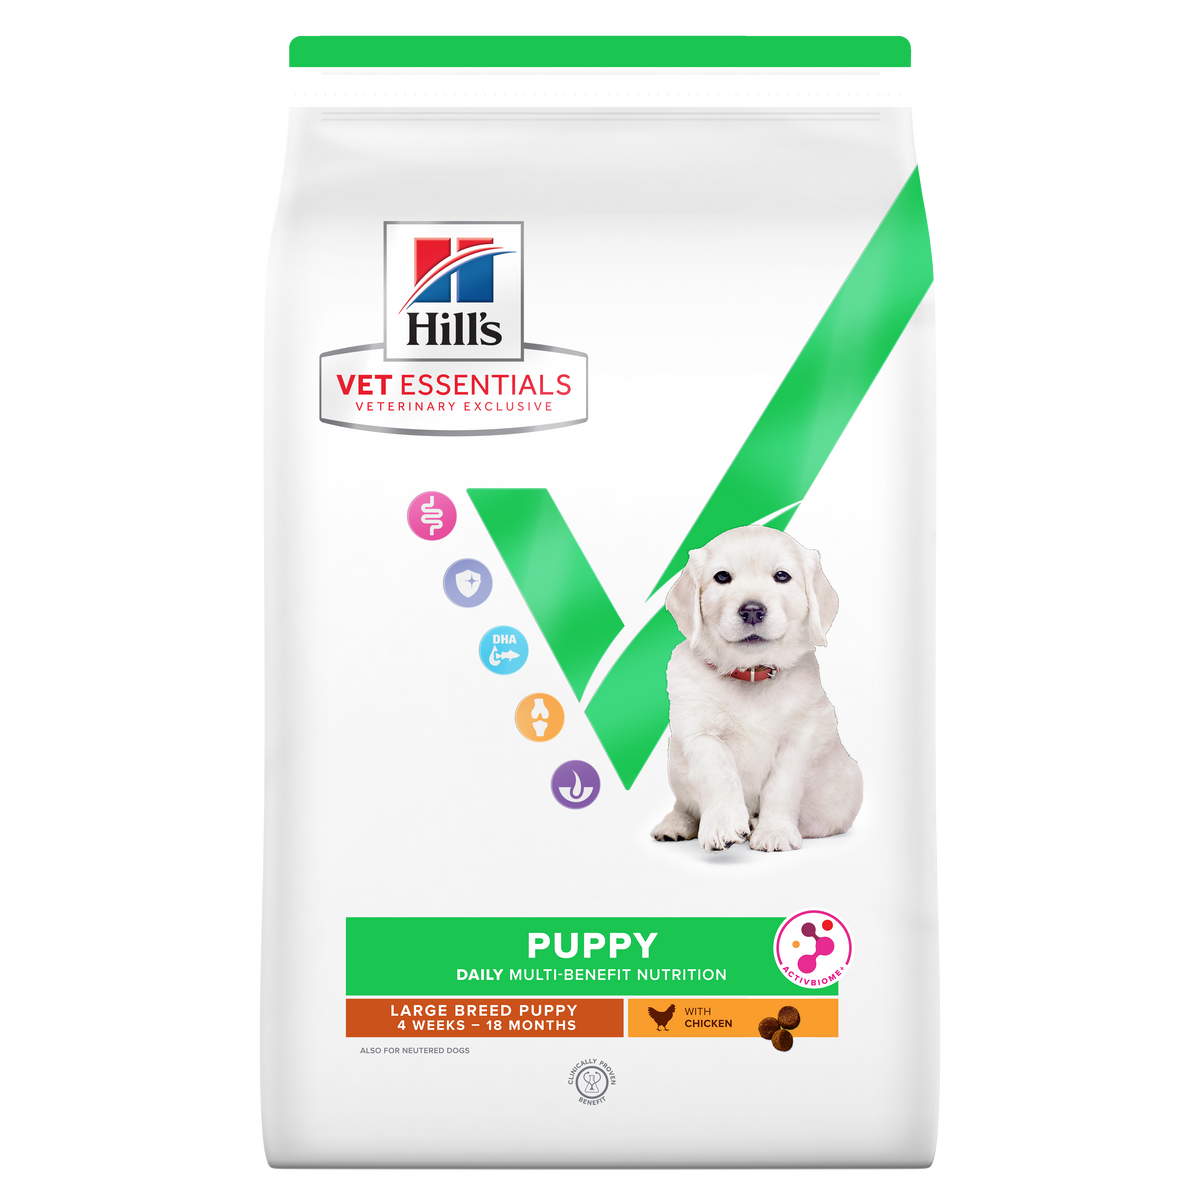 Hill's VET ESSENTIALS MULTI-BENEFIT Large Breed Dry Puppy Food with Chicken